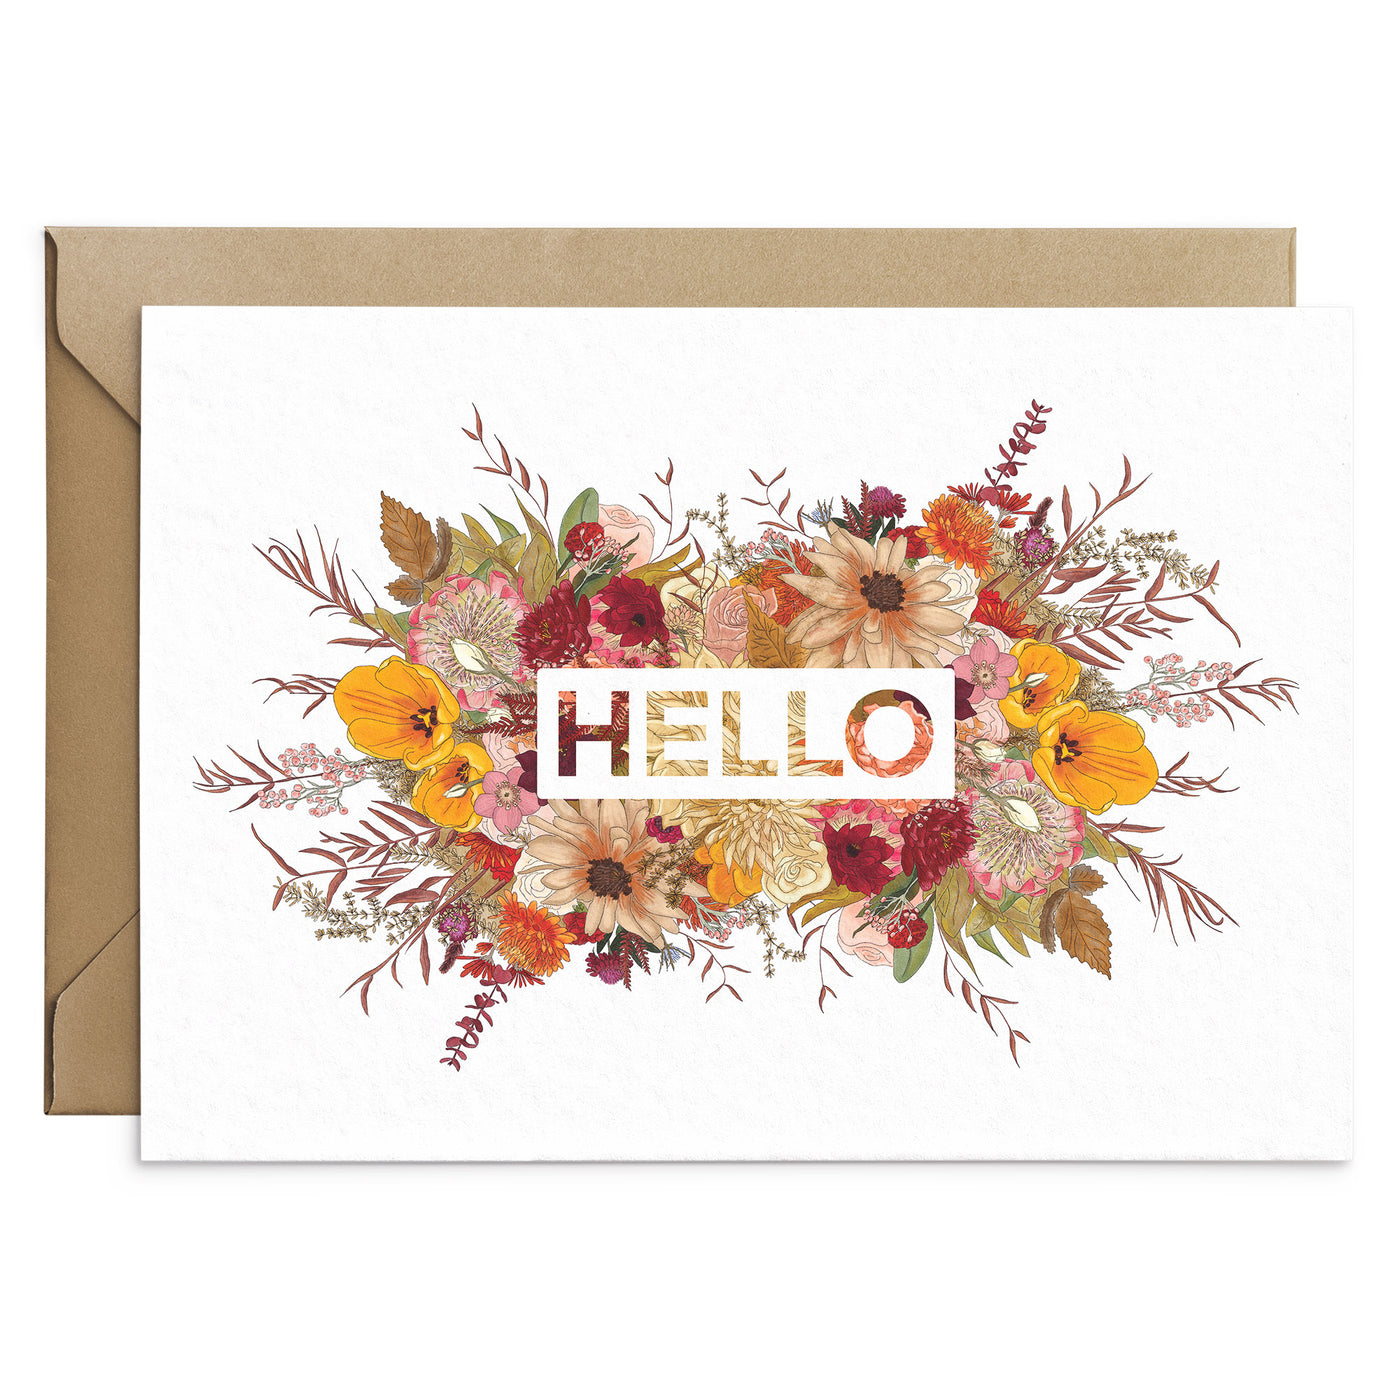 Hello-Autumn-Flowers-Everyday-Greetings-Card-Poppins-And-Co